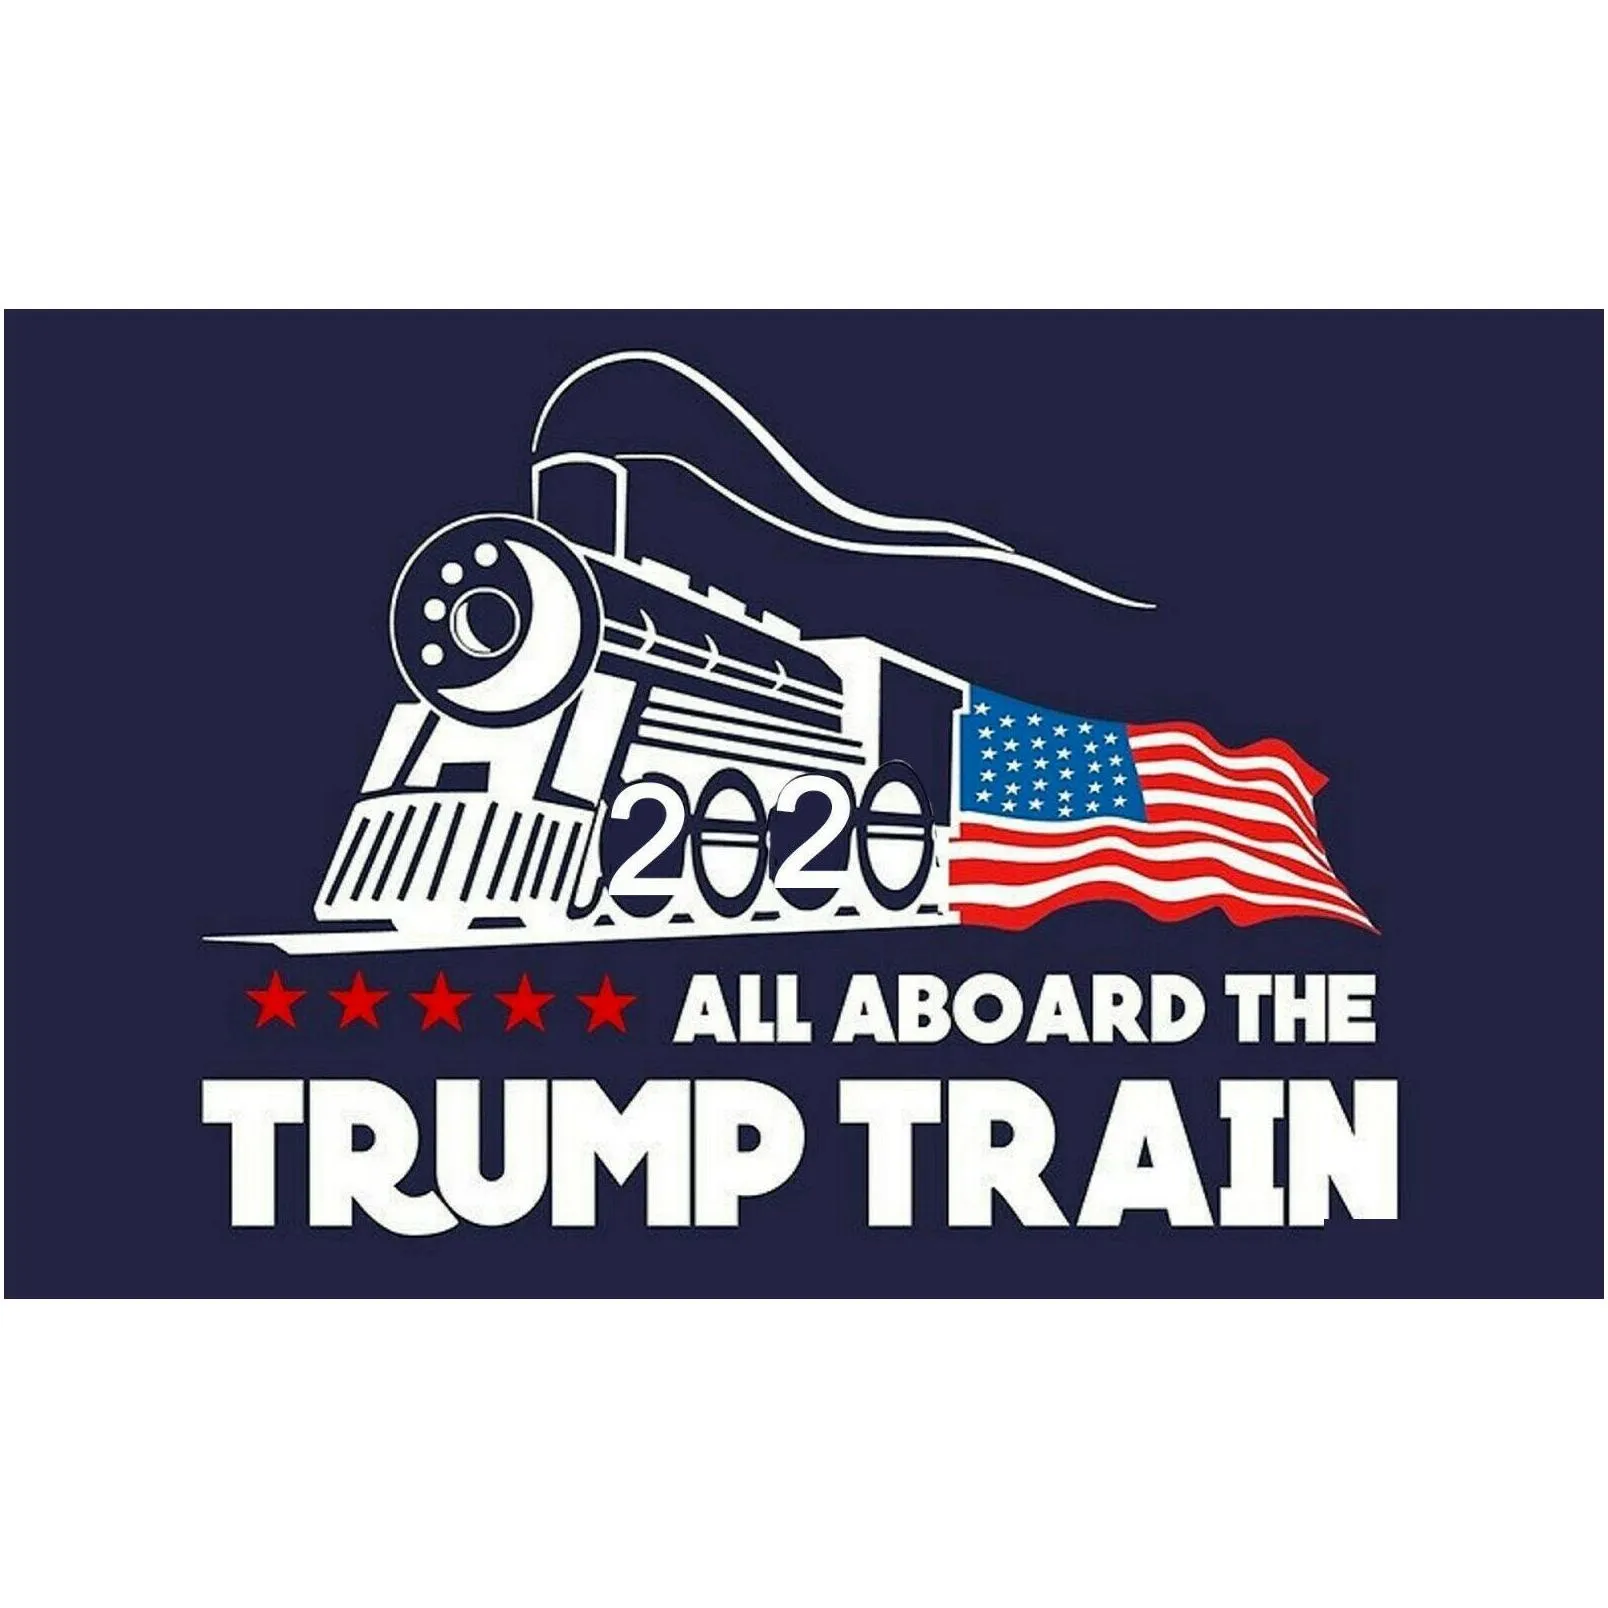 free shipping 18 types New Styles Donald Trump 2020 Car Stickers train Sticker Keep Make America Great Decal for Car Styling Vehicle